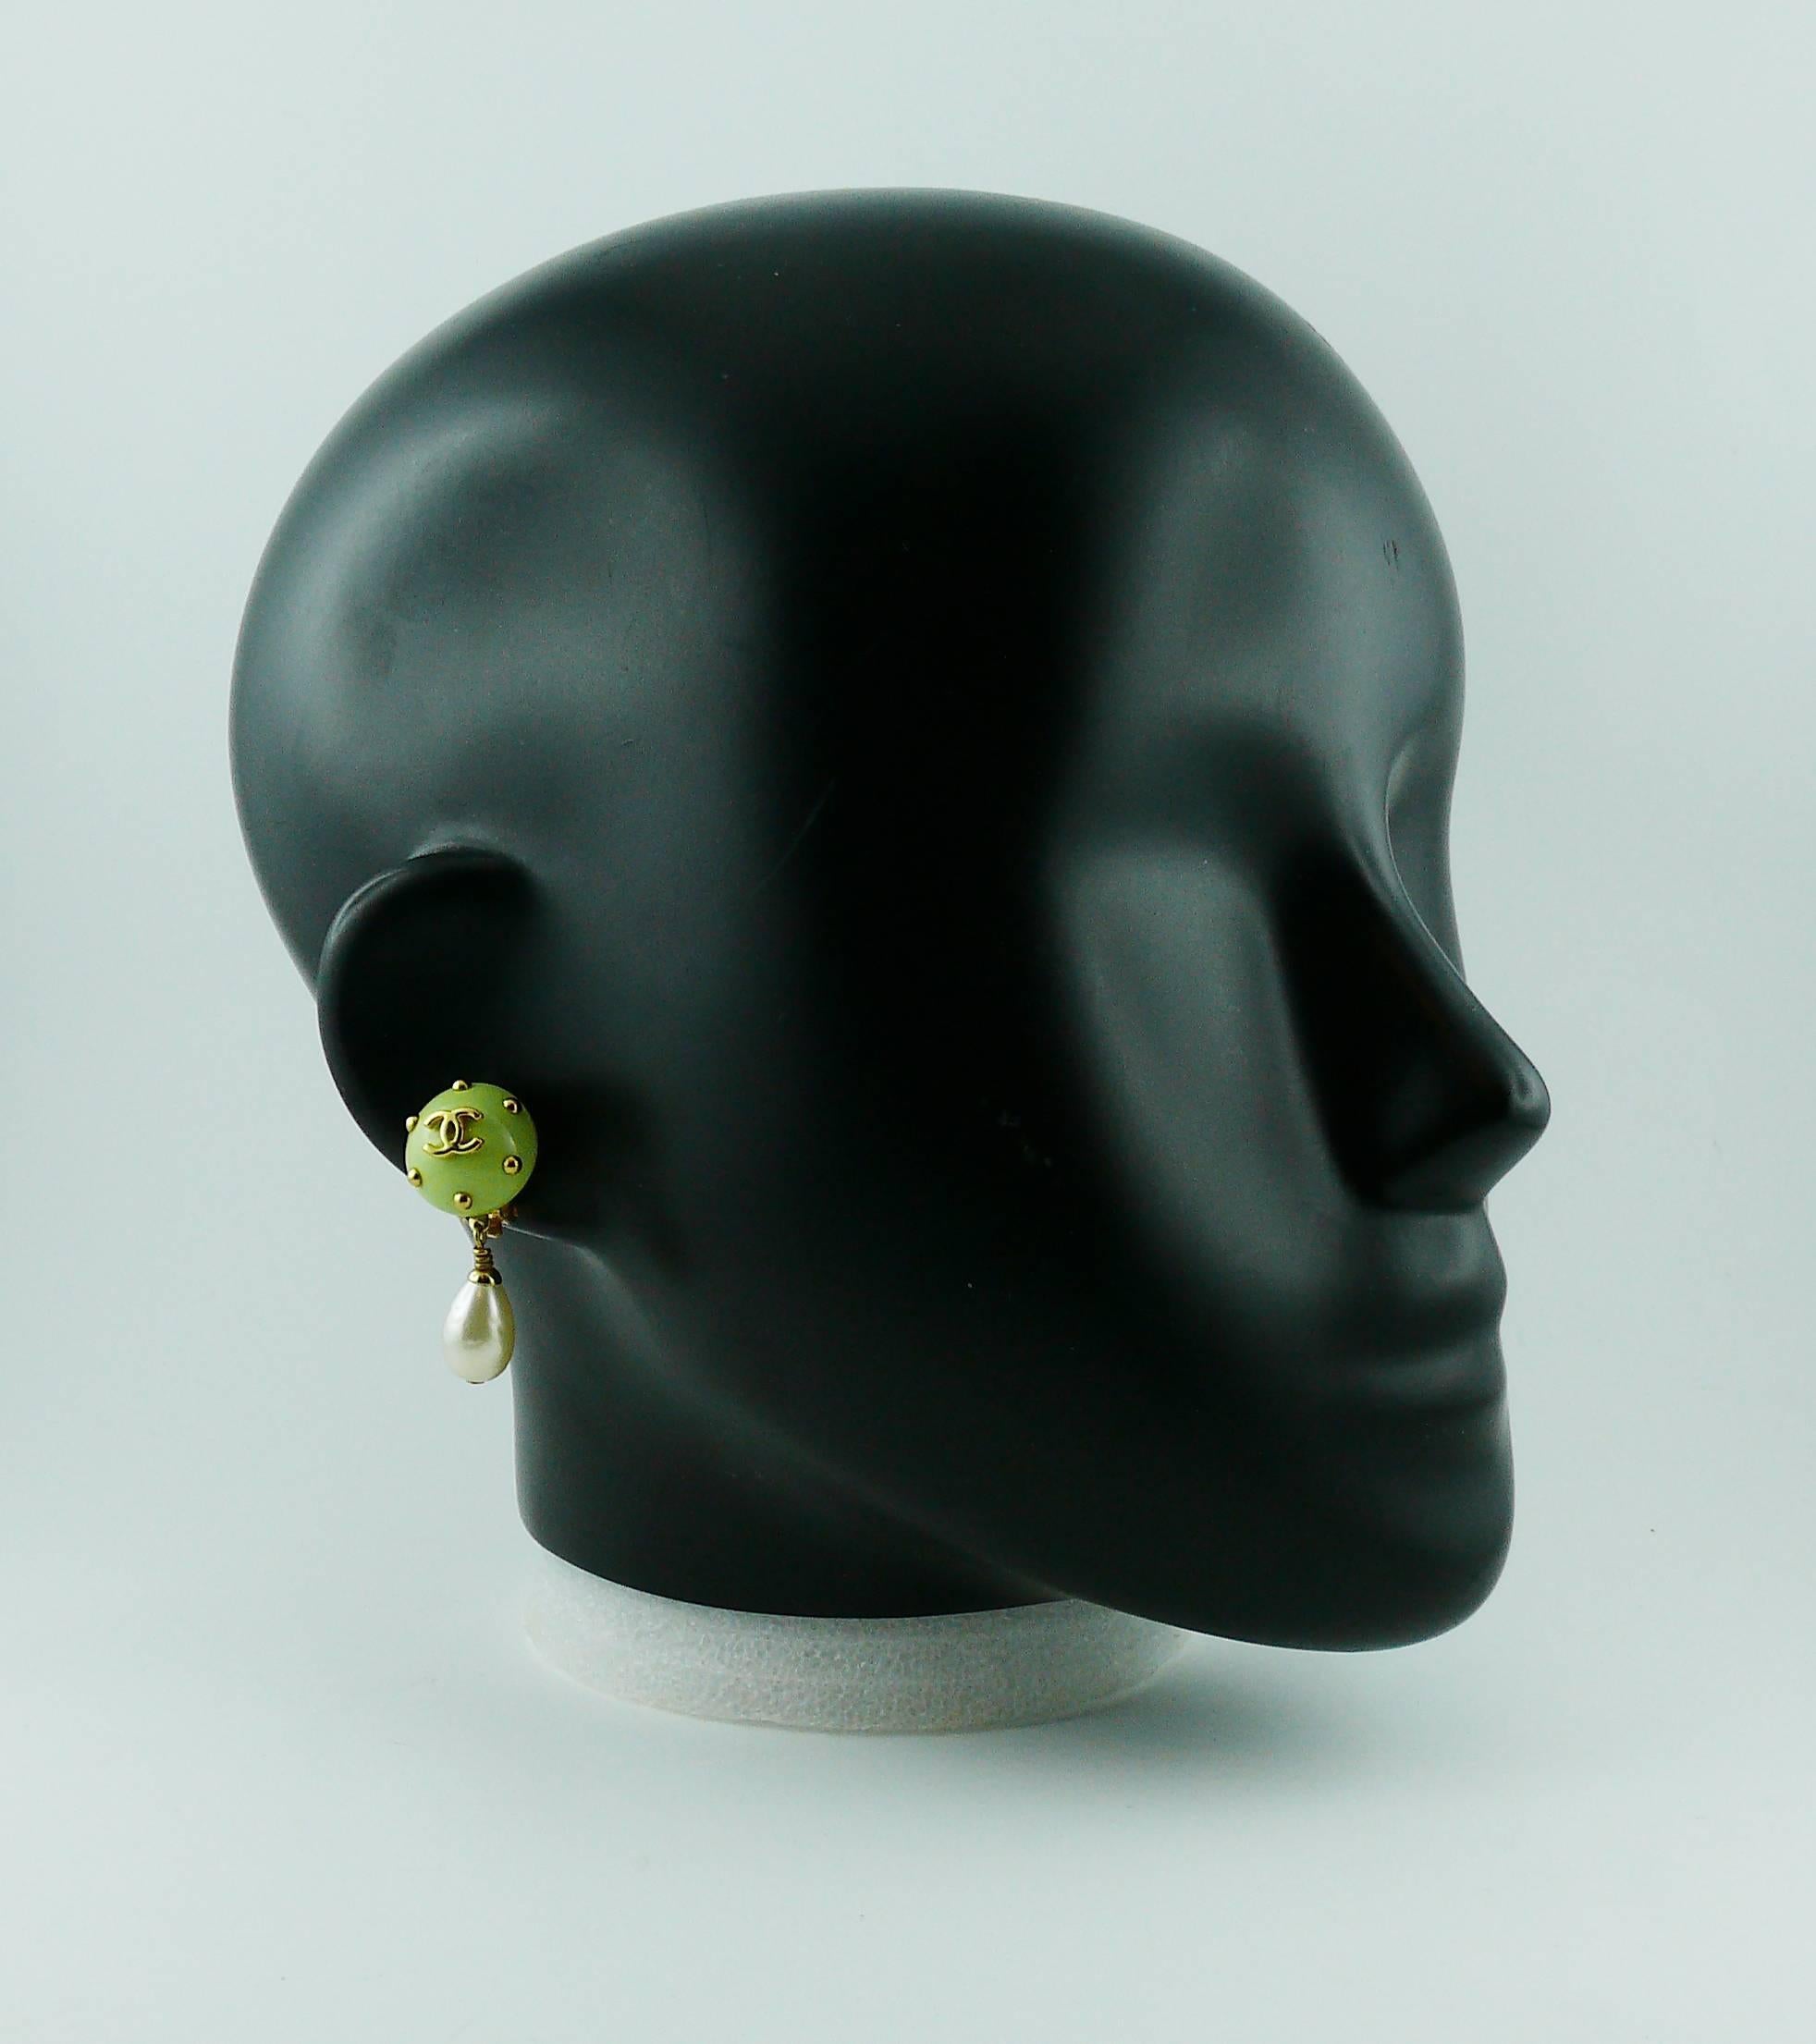 CHANEL vintage dangling earrings (clip-on) featuring a green resin studded dome top with CC logo at center and a faux pearl drop.

Cruise 1996 Collection.

Marked CHANEL 96 C Made in France.

Indicative measurements : height approx. 3.6 cm (1.42